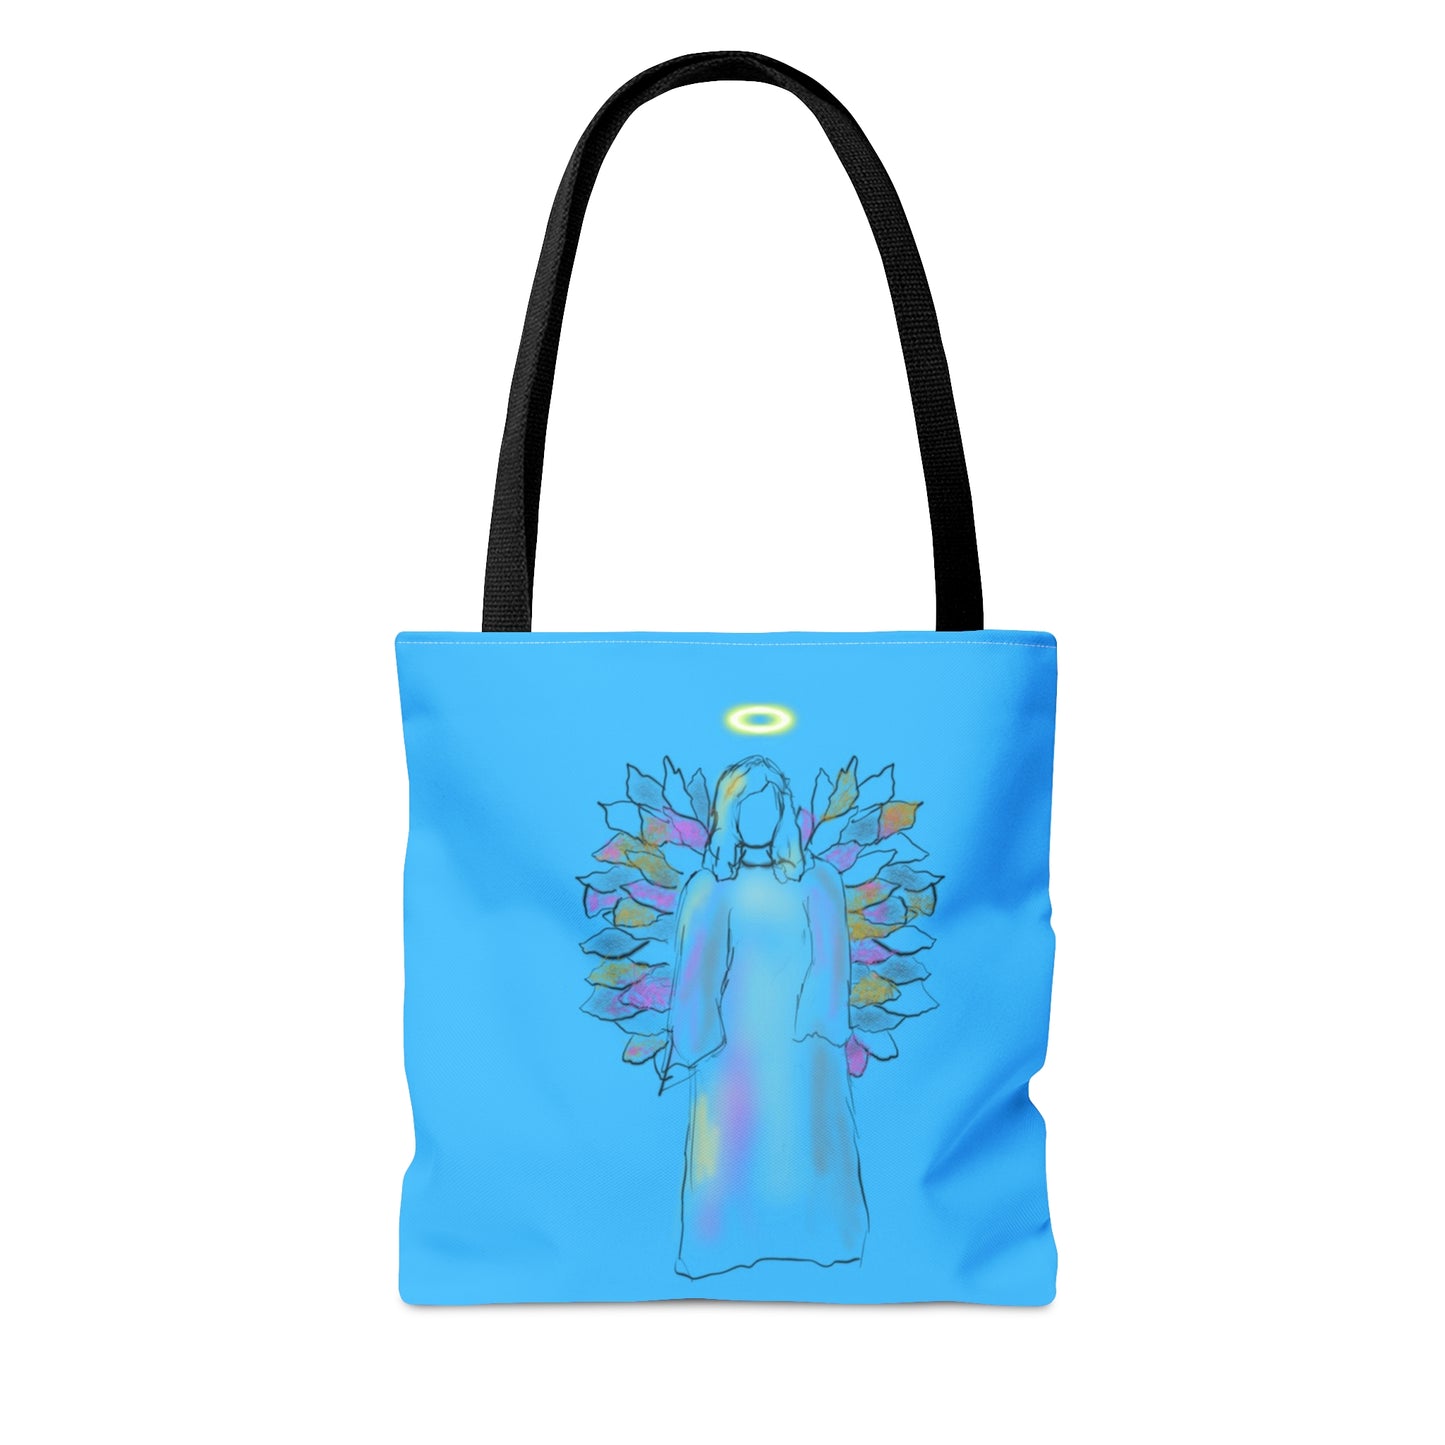 The Angel Abides Tote